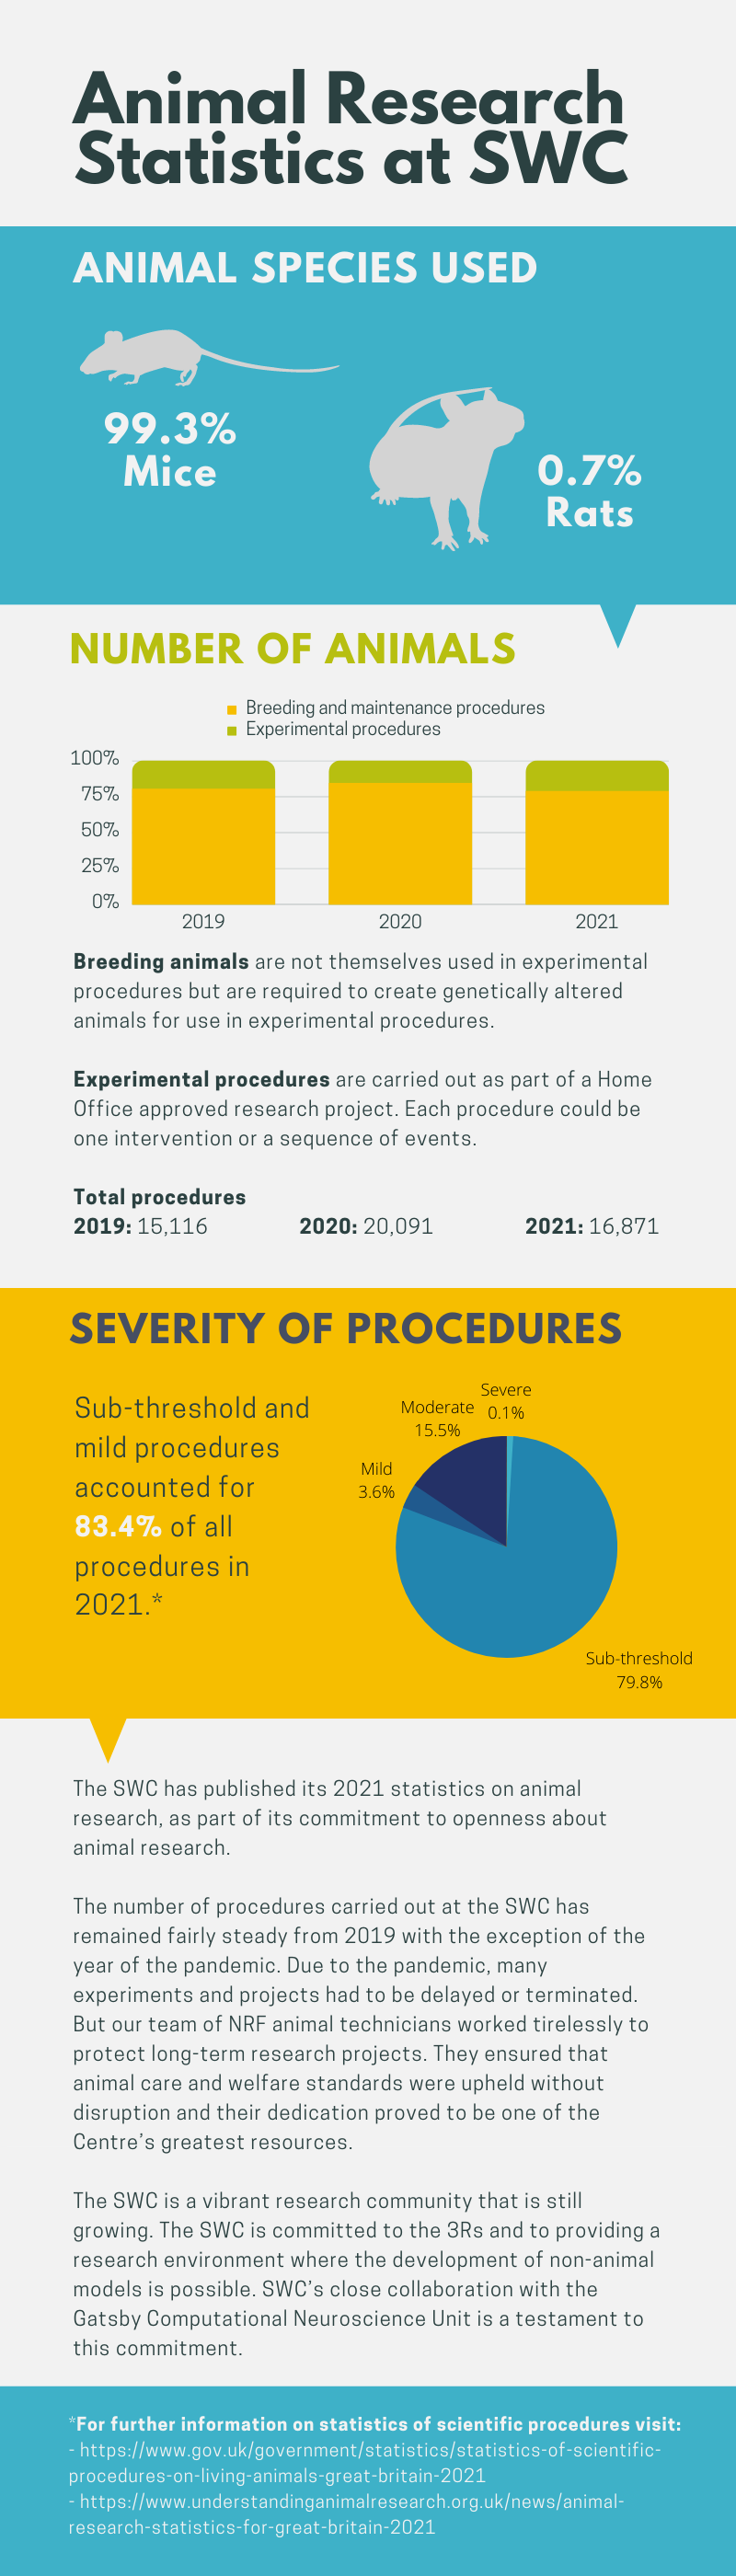 Infographic showing animal species used at SWC 99.3% mice and 0.7% rats; number of animals use in breeding and maintenance procedures and experimental procedures; severity of procedures - sub-threshold and mild procedures accounted for 83.4% of all procedures in 2021